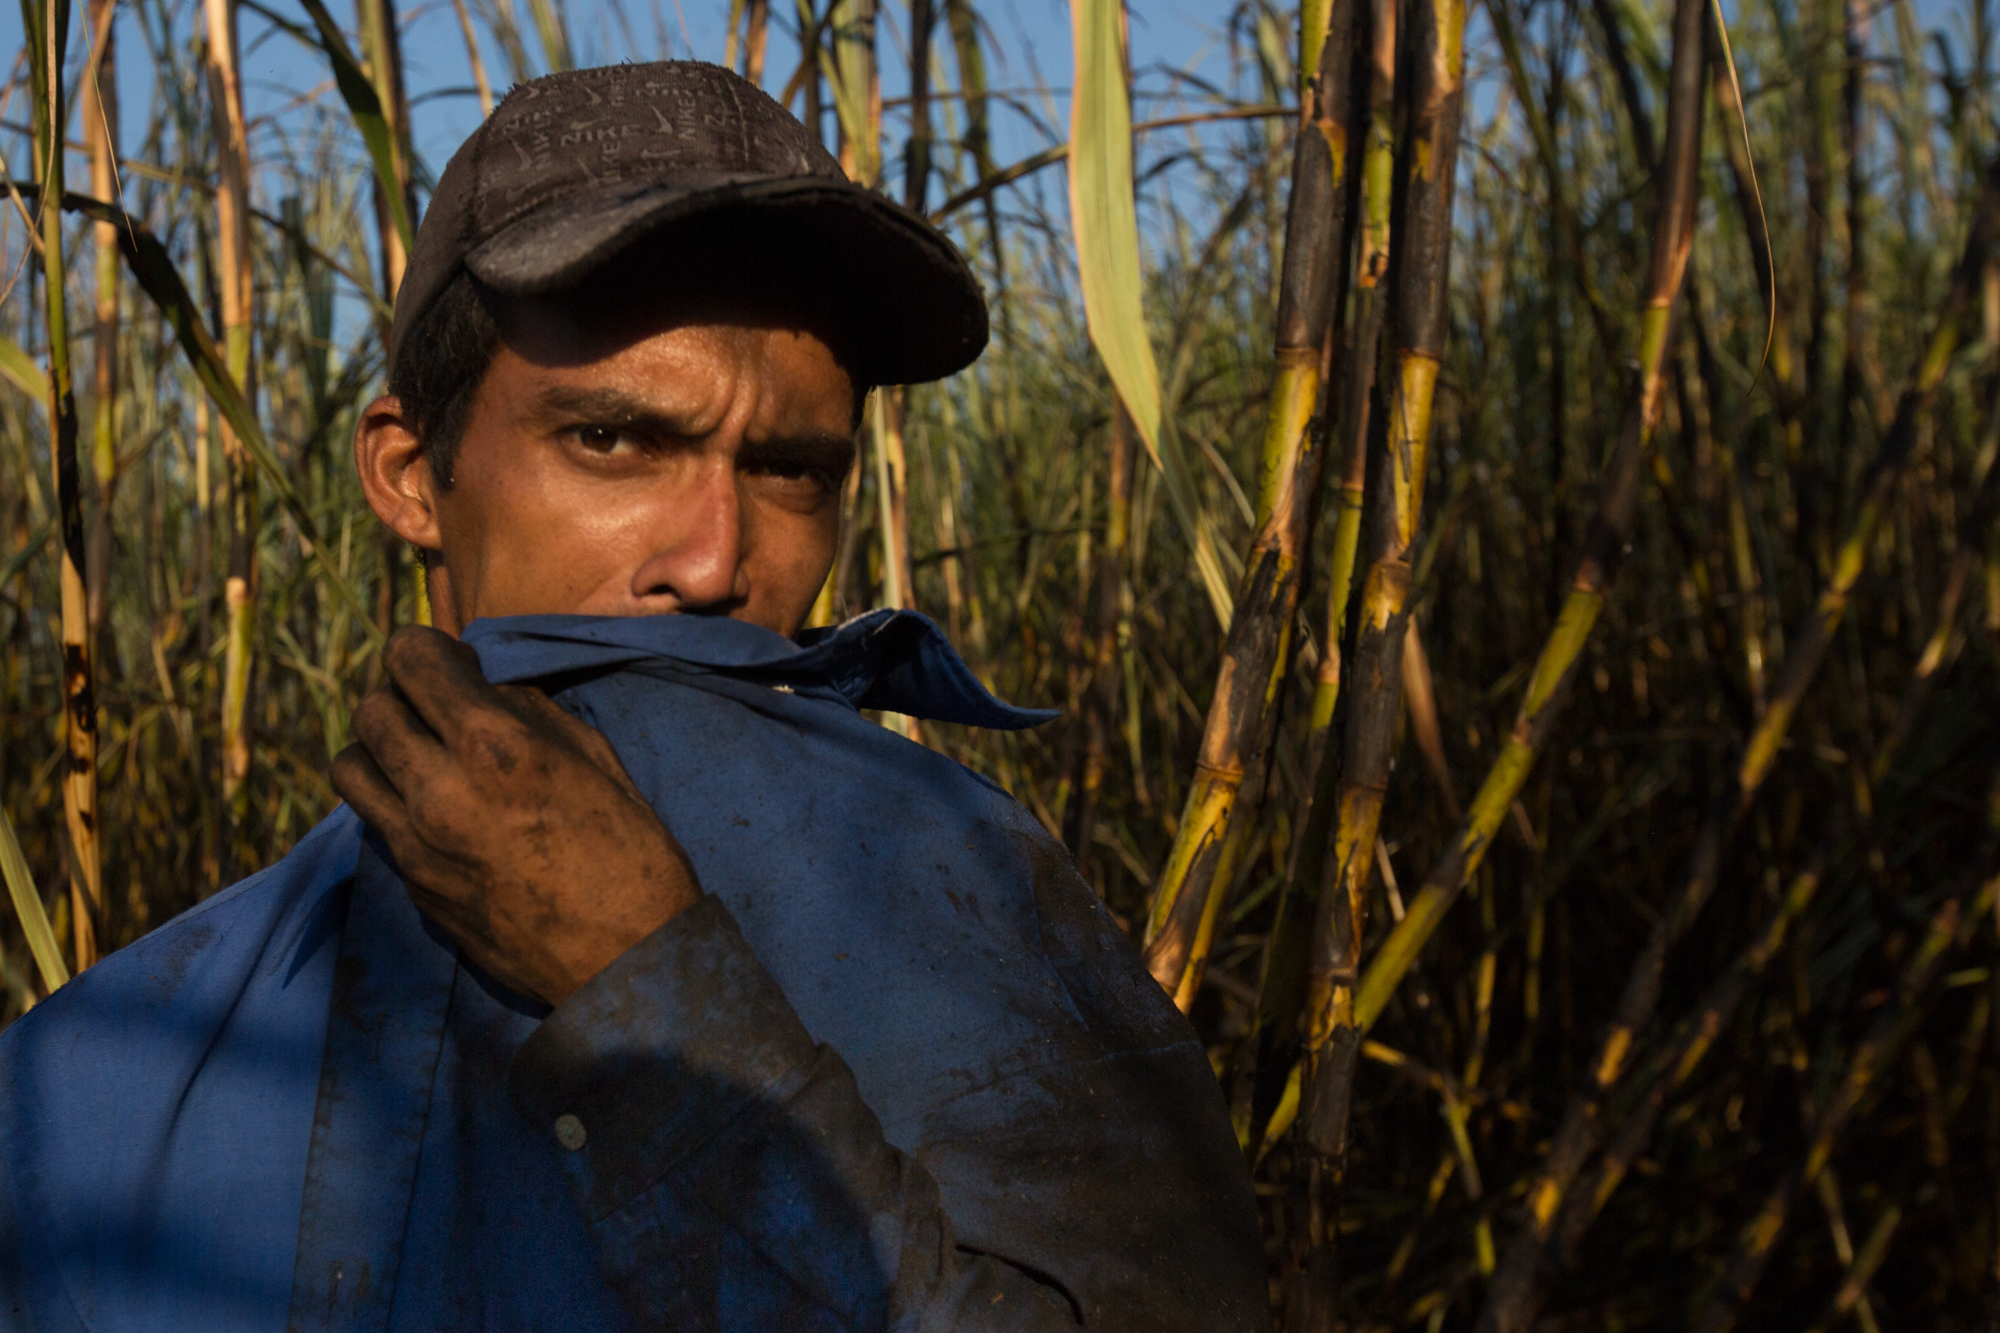  Miguel Abrego Rivera, 32, of Los Almendros, Cuscatlan, El Salvador cuts cane with a new machete as part of the WE Program. He says he can typically cut 10 tons a day with the new one, but today only 5 due to bad conditions of the sugarcane. He finis